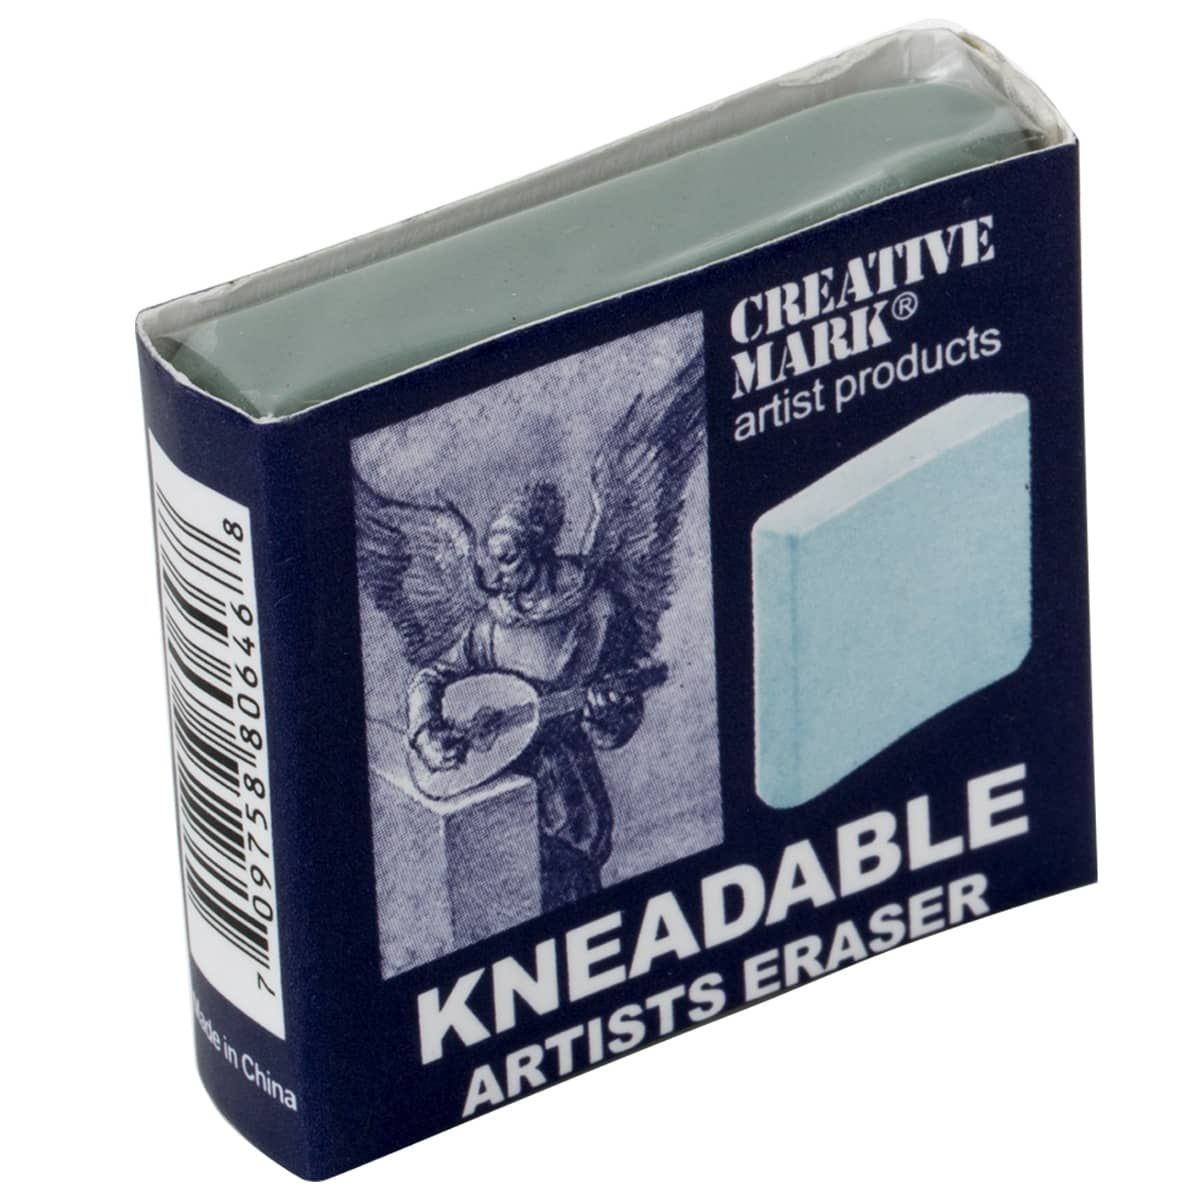 Winsor & Newton Kneadable Erasers - Erasers - Drawing & Calligraphy